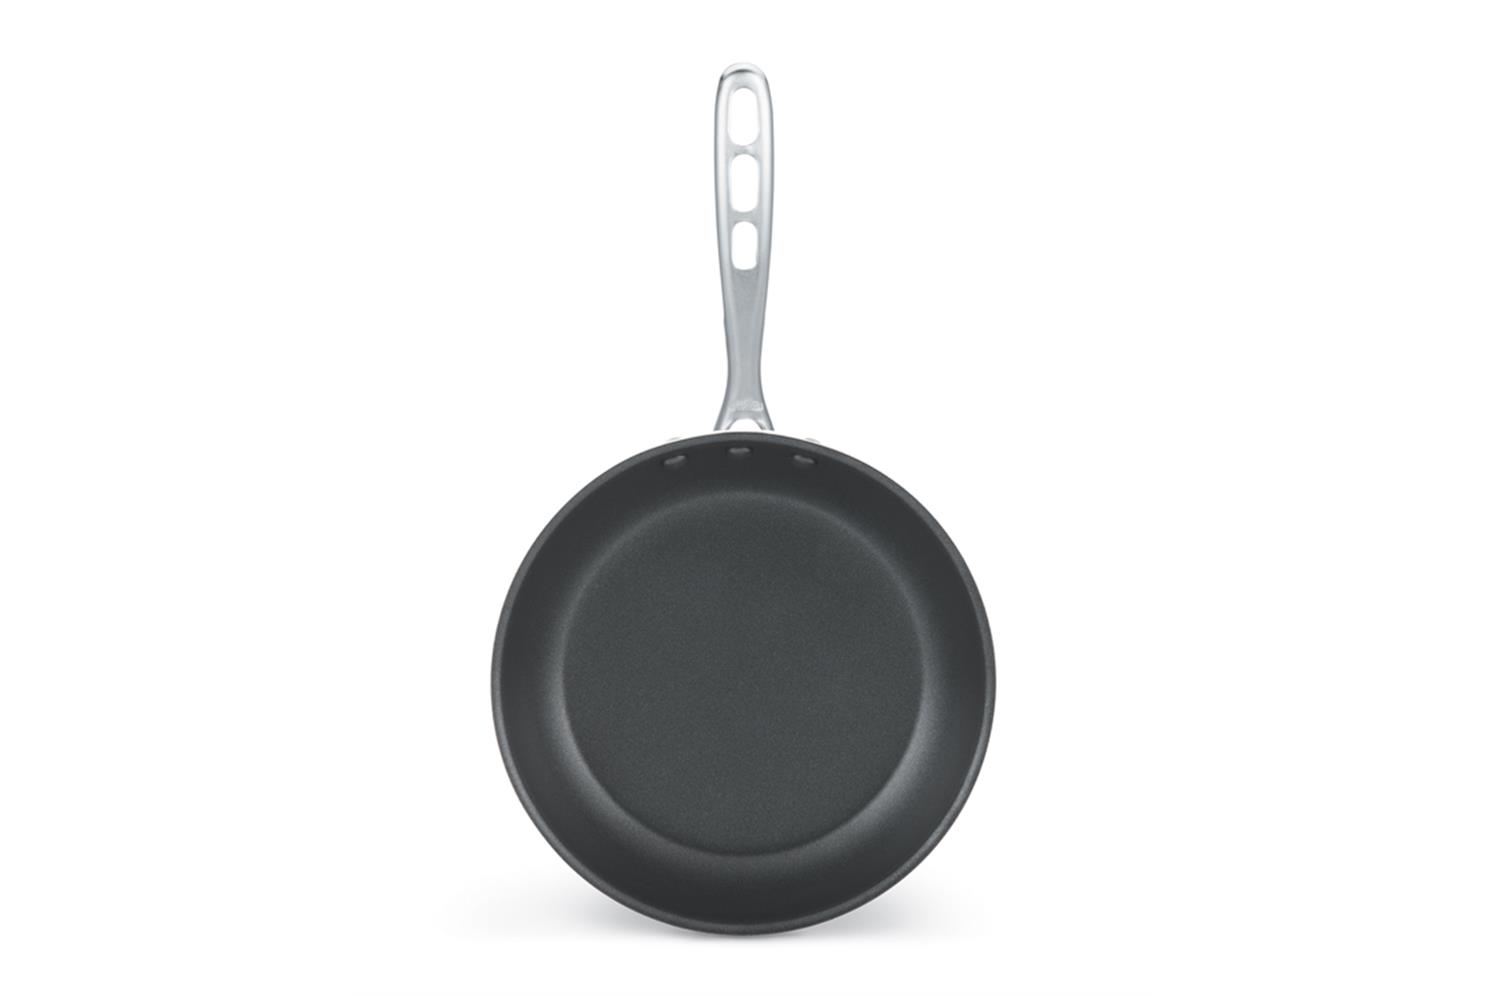 Vollrath 67947 Wear-Ever Fry Pans with CeramiGuard II Interior with TriVent Handle